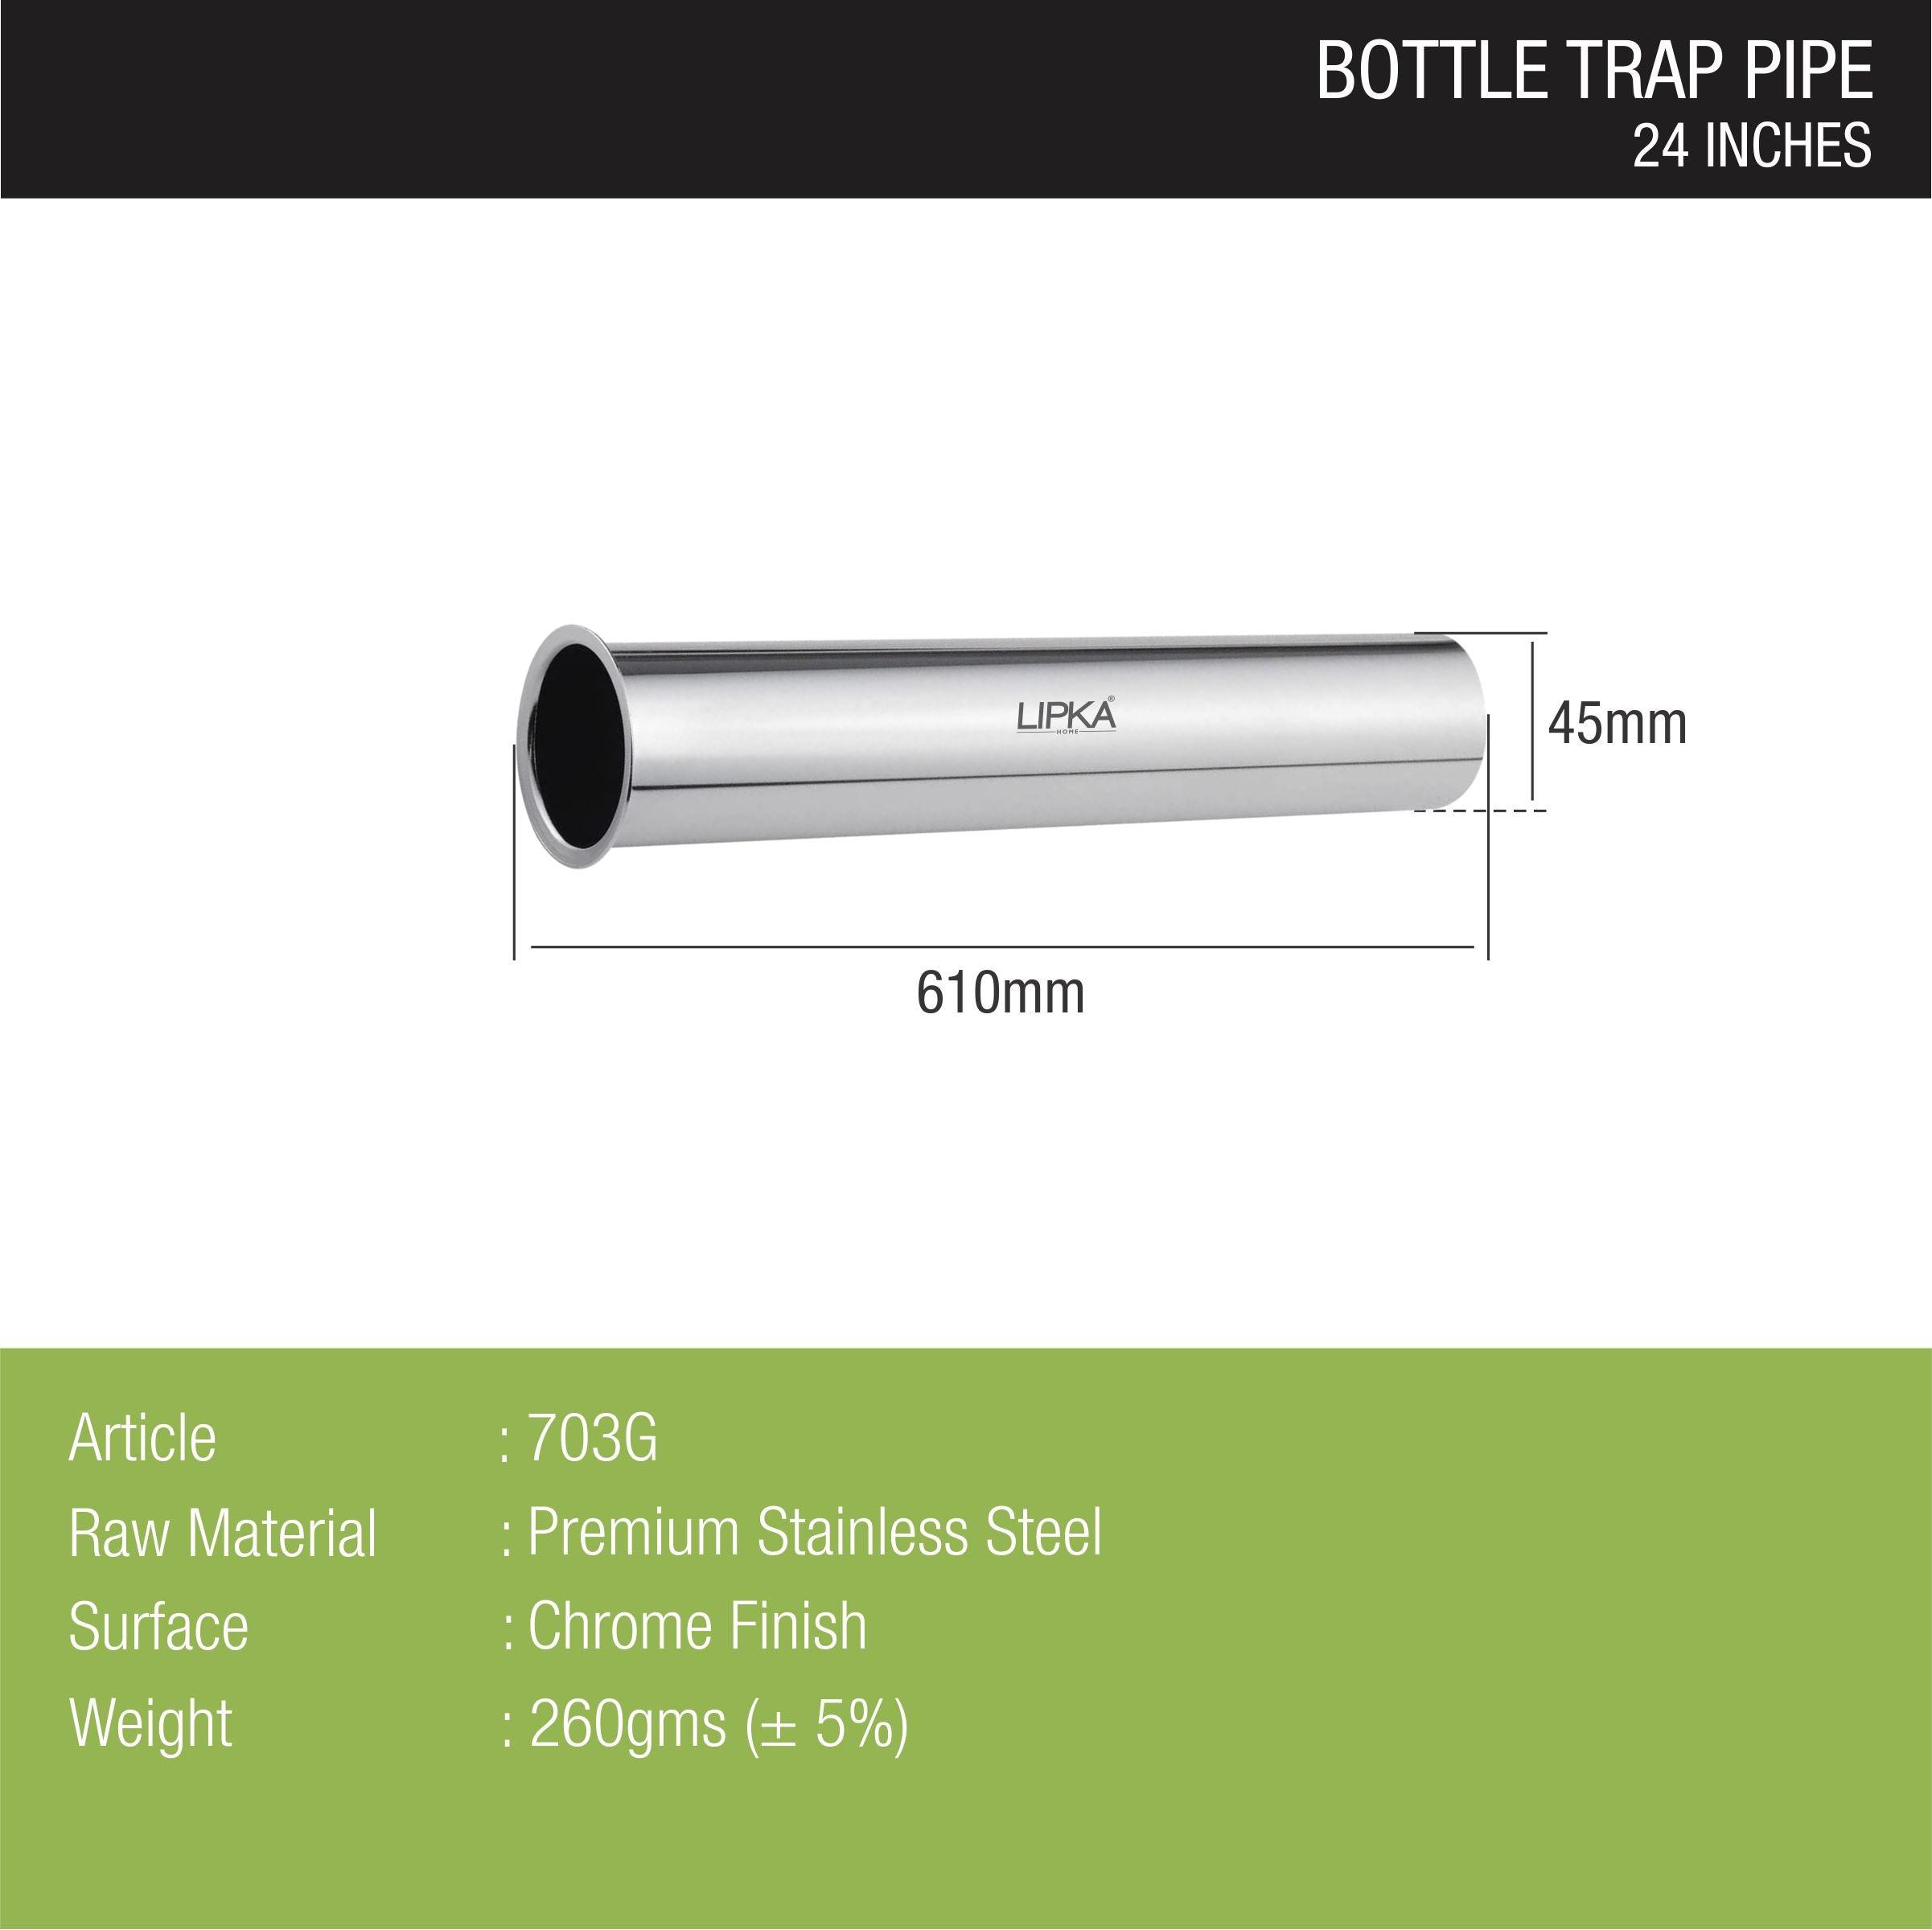 Bottle Trap Stainless Steel Pipe (24 inches) sizes and dimensions